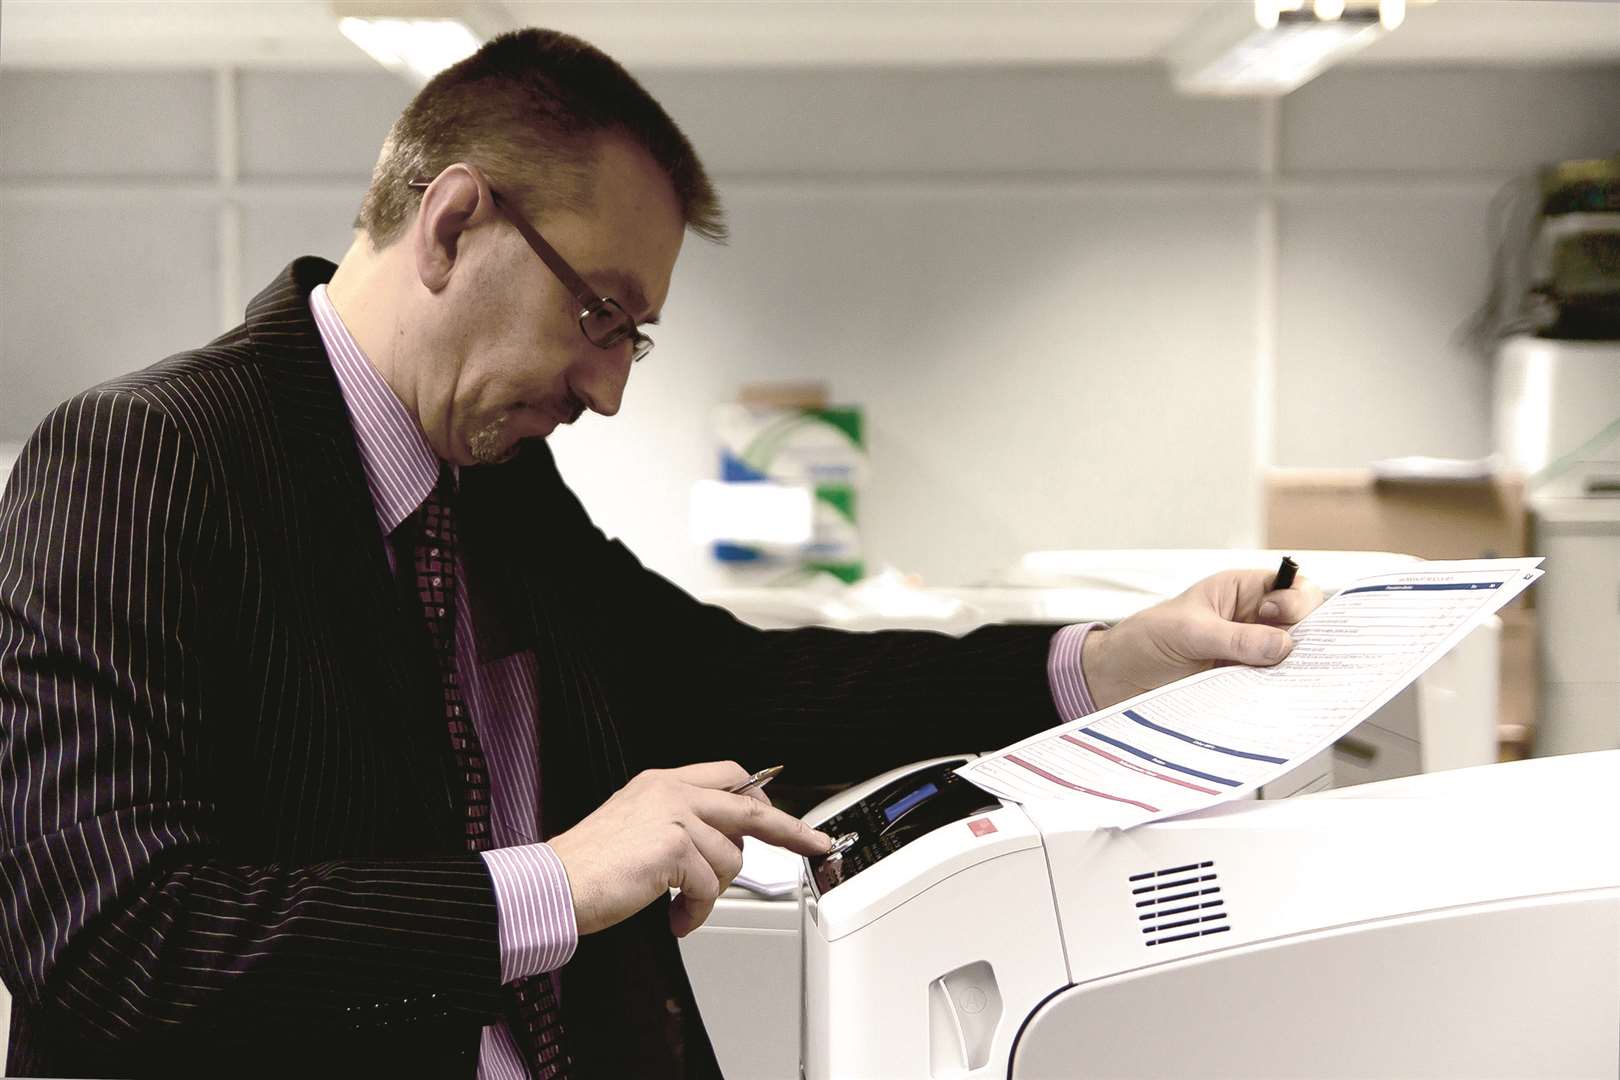 Geerings supplies printers and copiers as well as other document technology